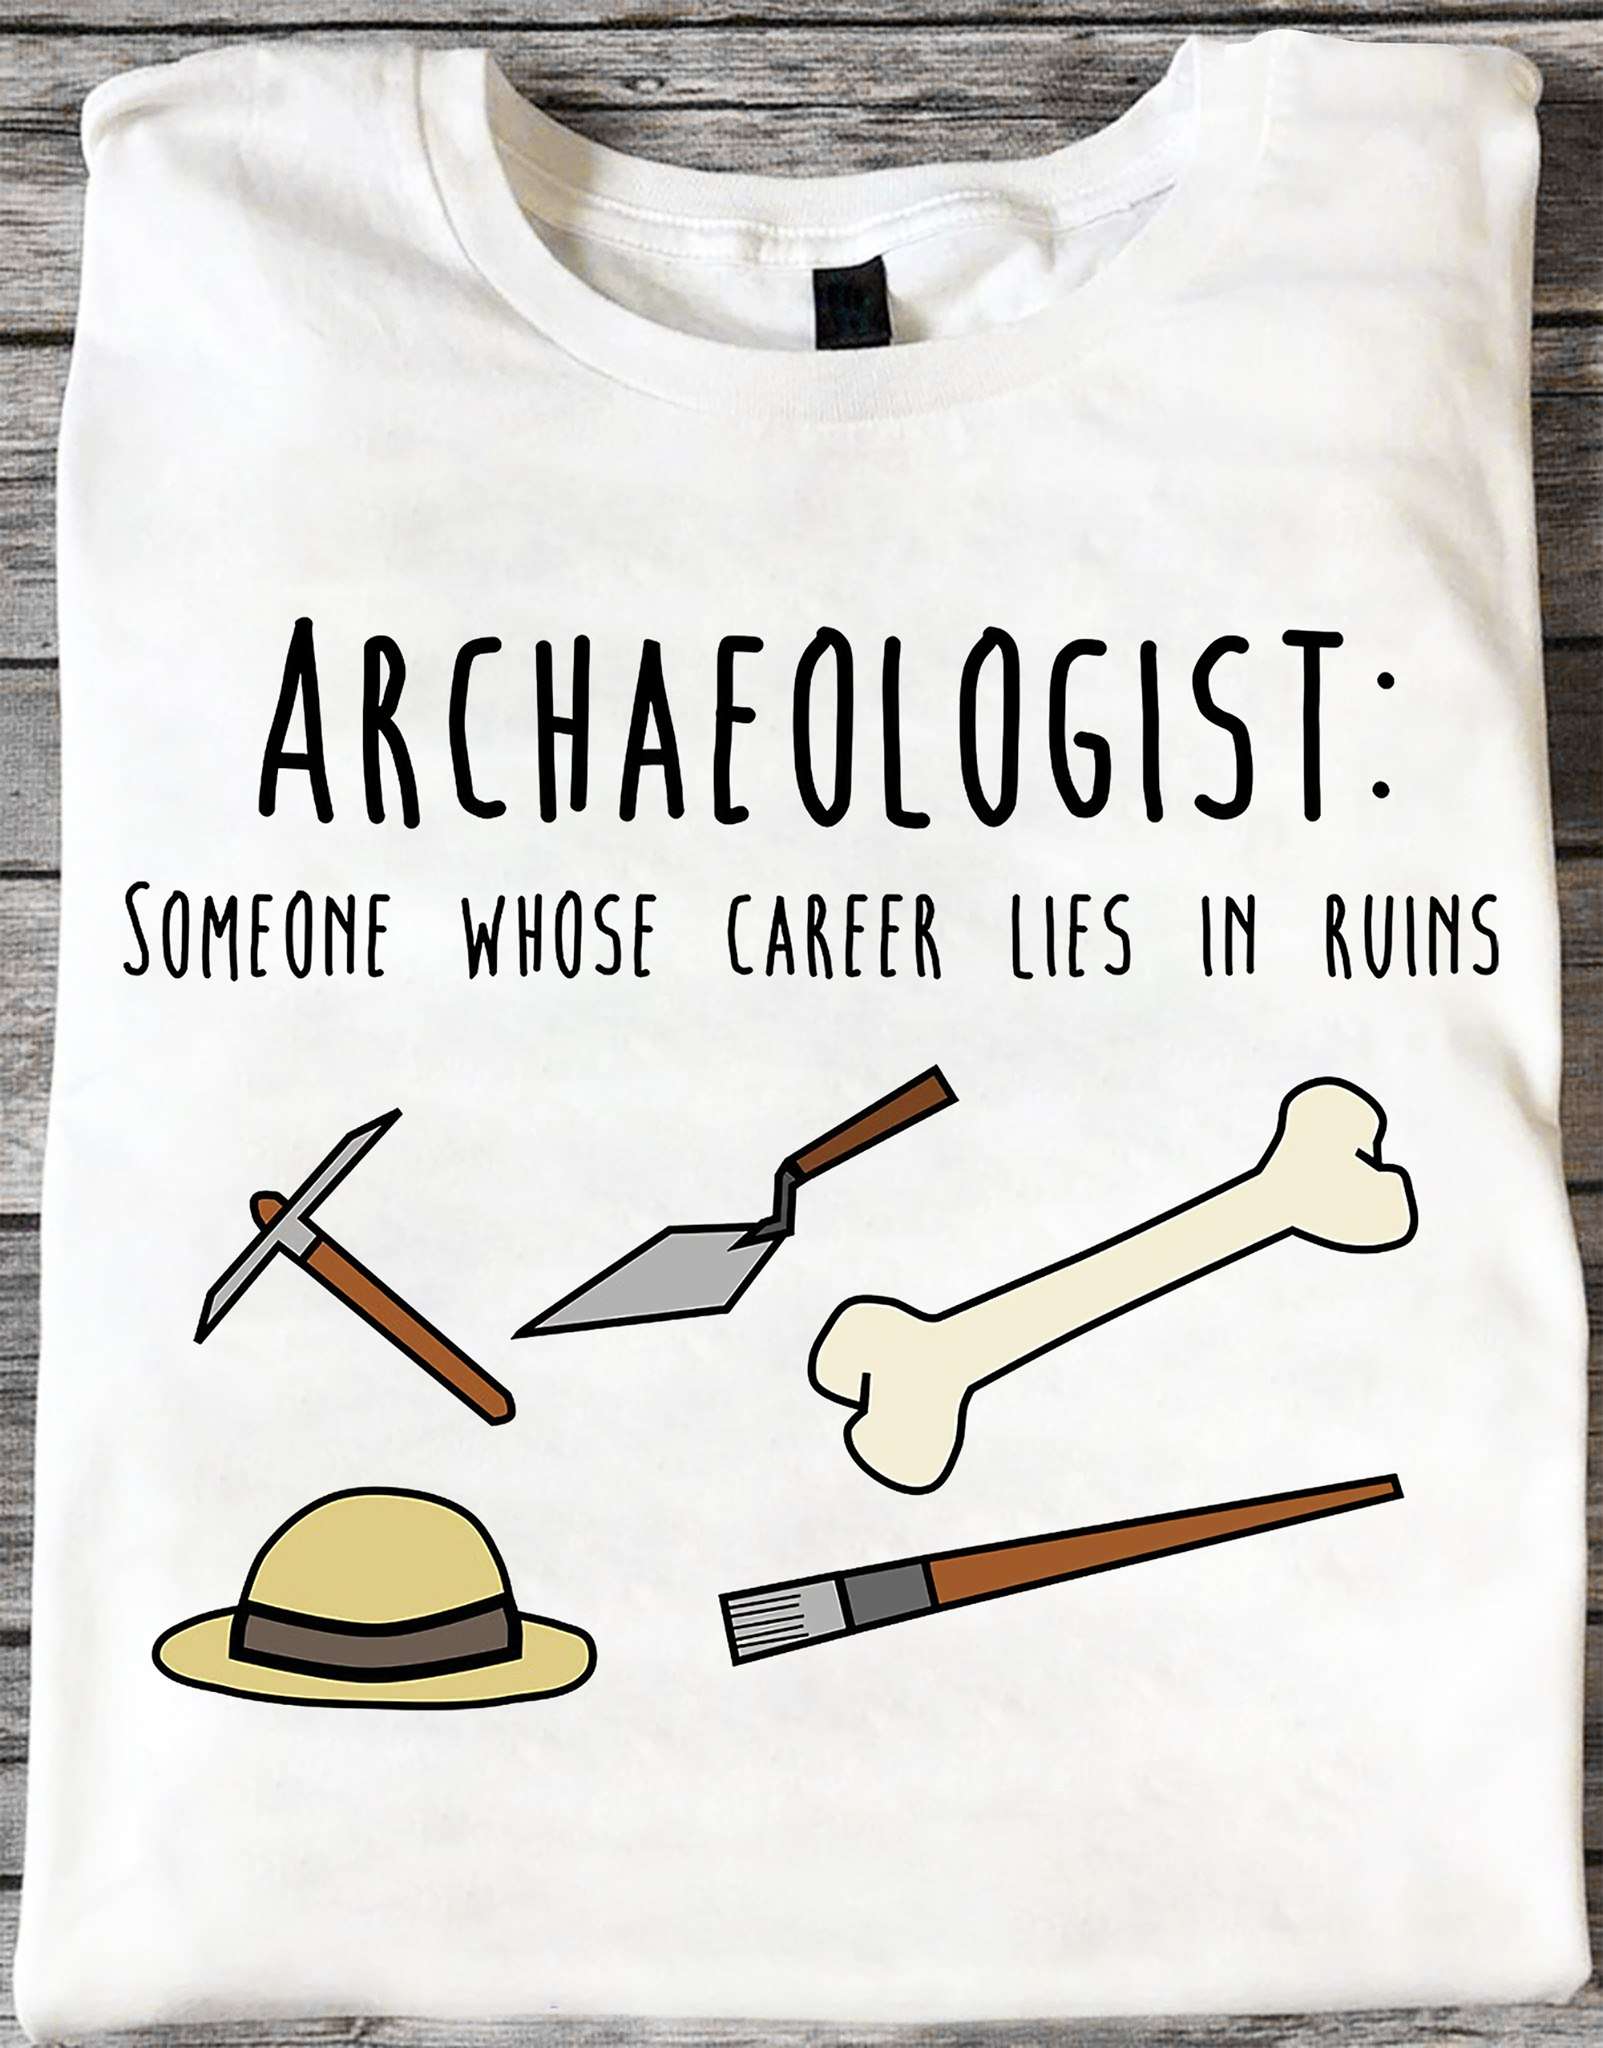 Archaeologist The Jobs - Archaeologist Someone whose career lies in ruins